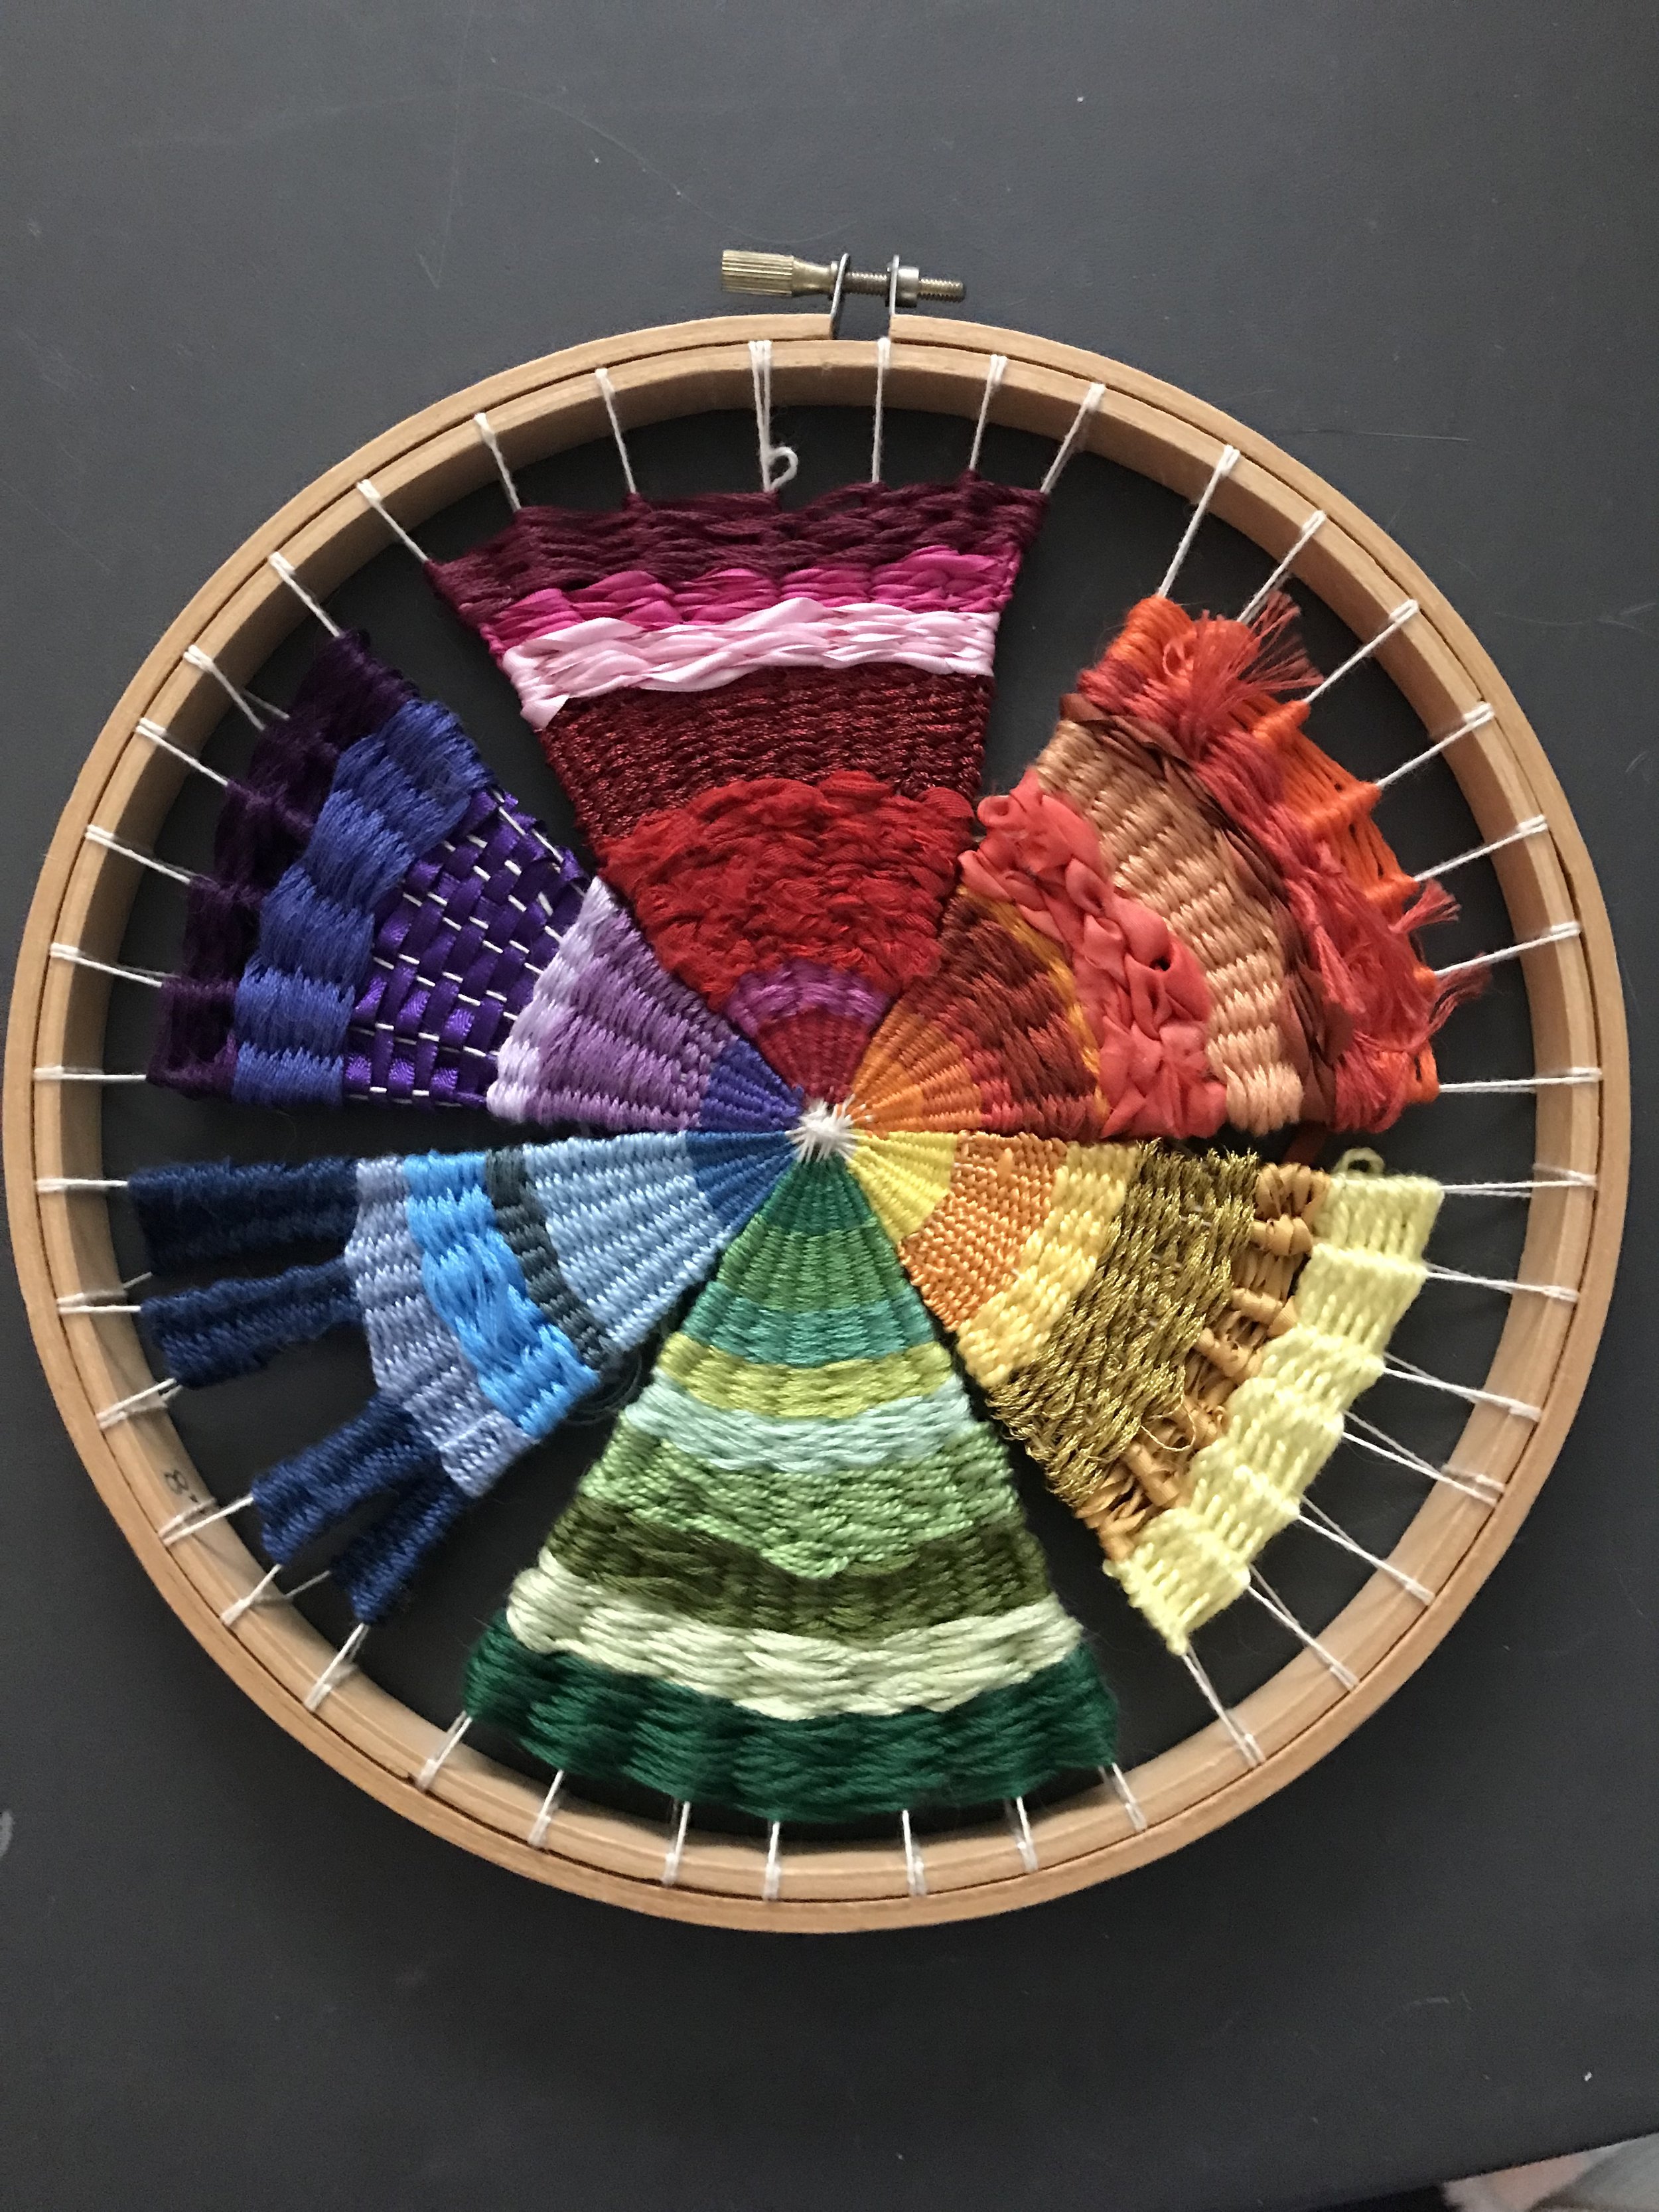 Hand woven color wheel with self-dyed fibers.jpg